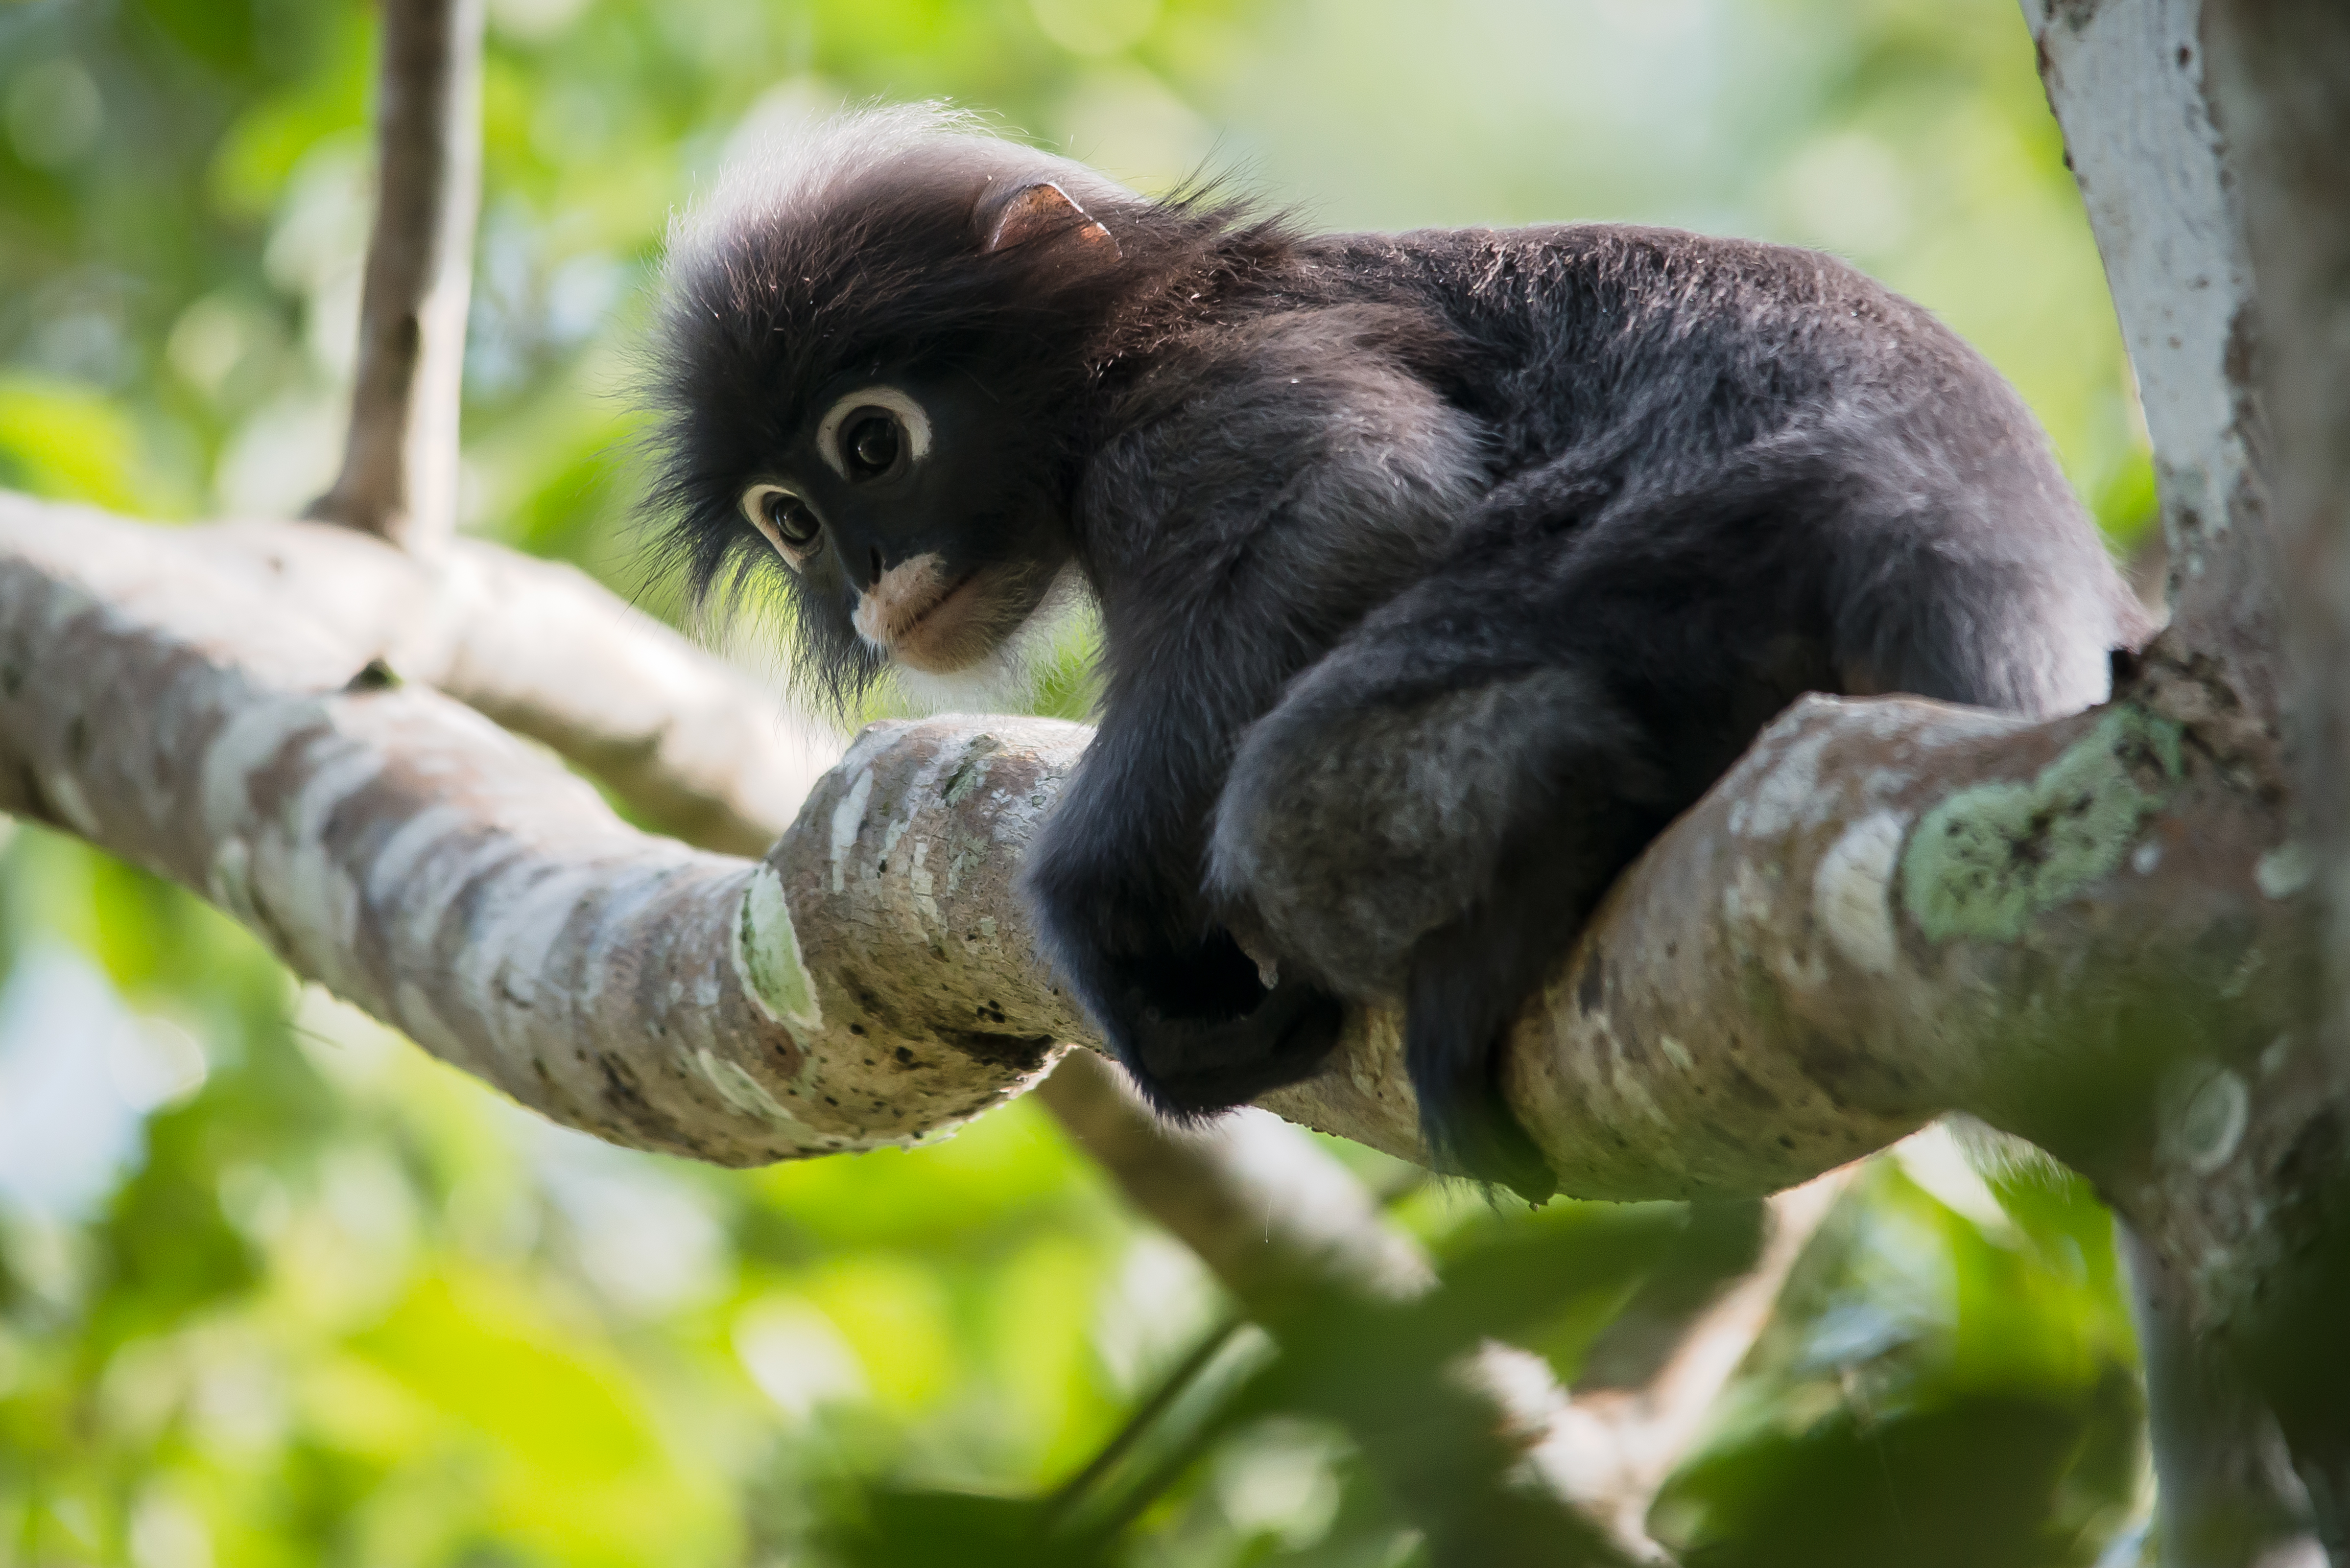 File:Dusky leaf monkey, Trachypithecus obscurus.jpg - Wikimedia Commons